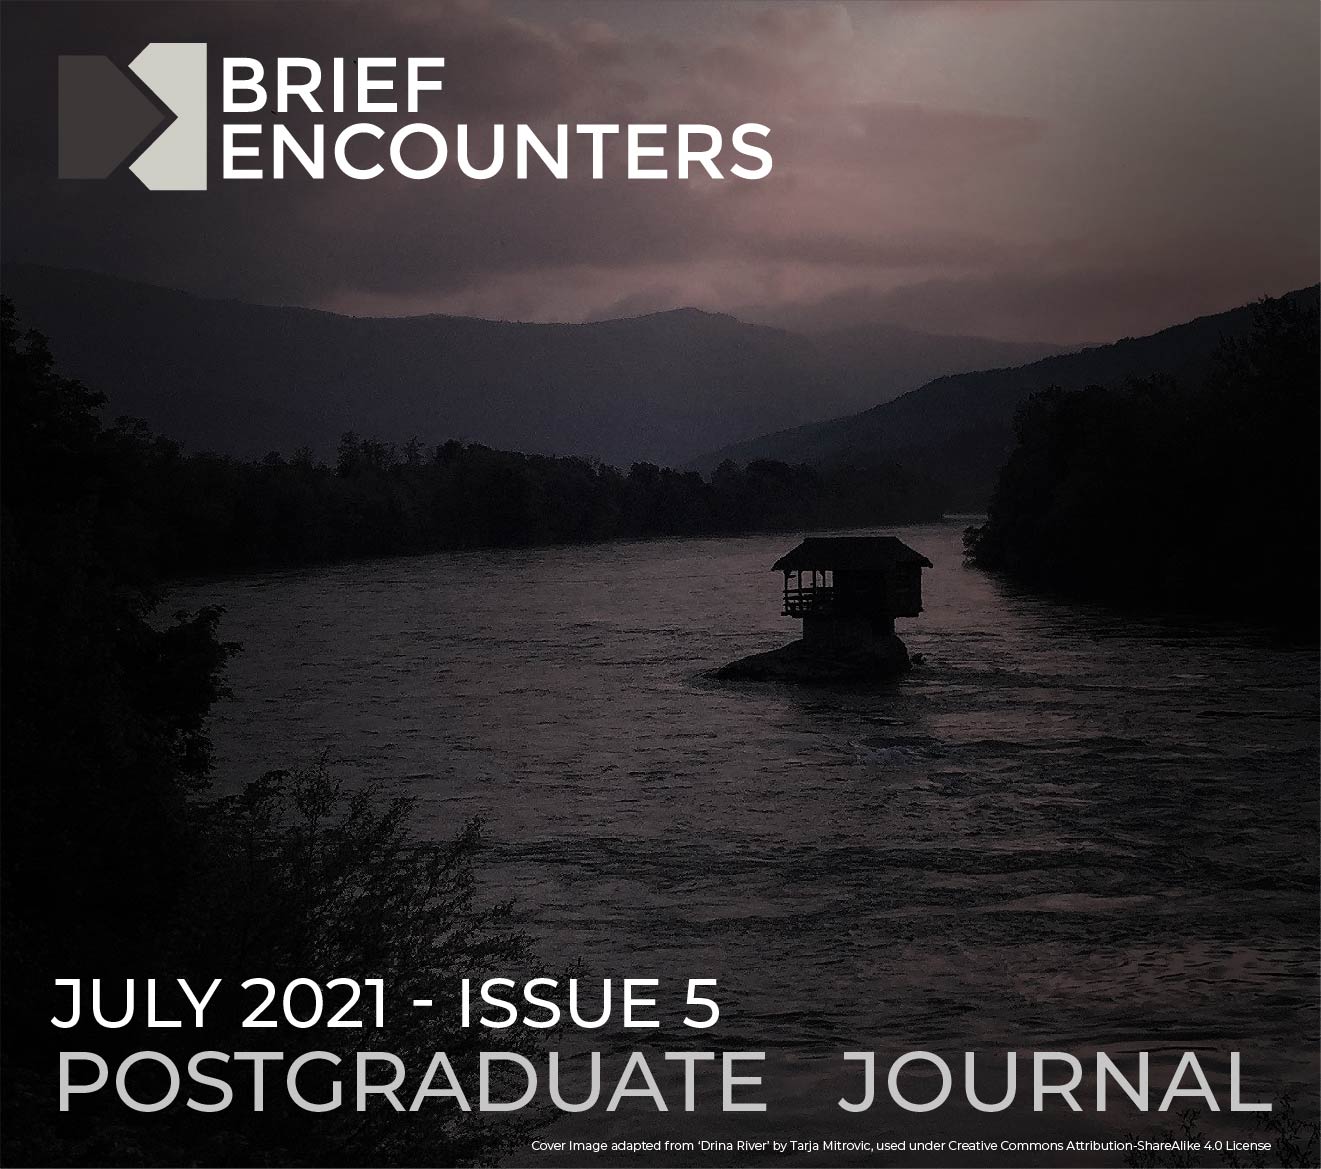 Issue 5 • 2021 • Brief Encounters: Issue 5